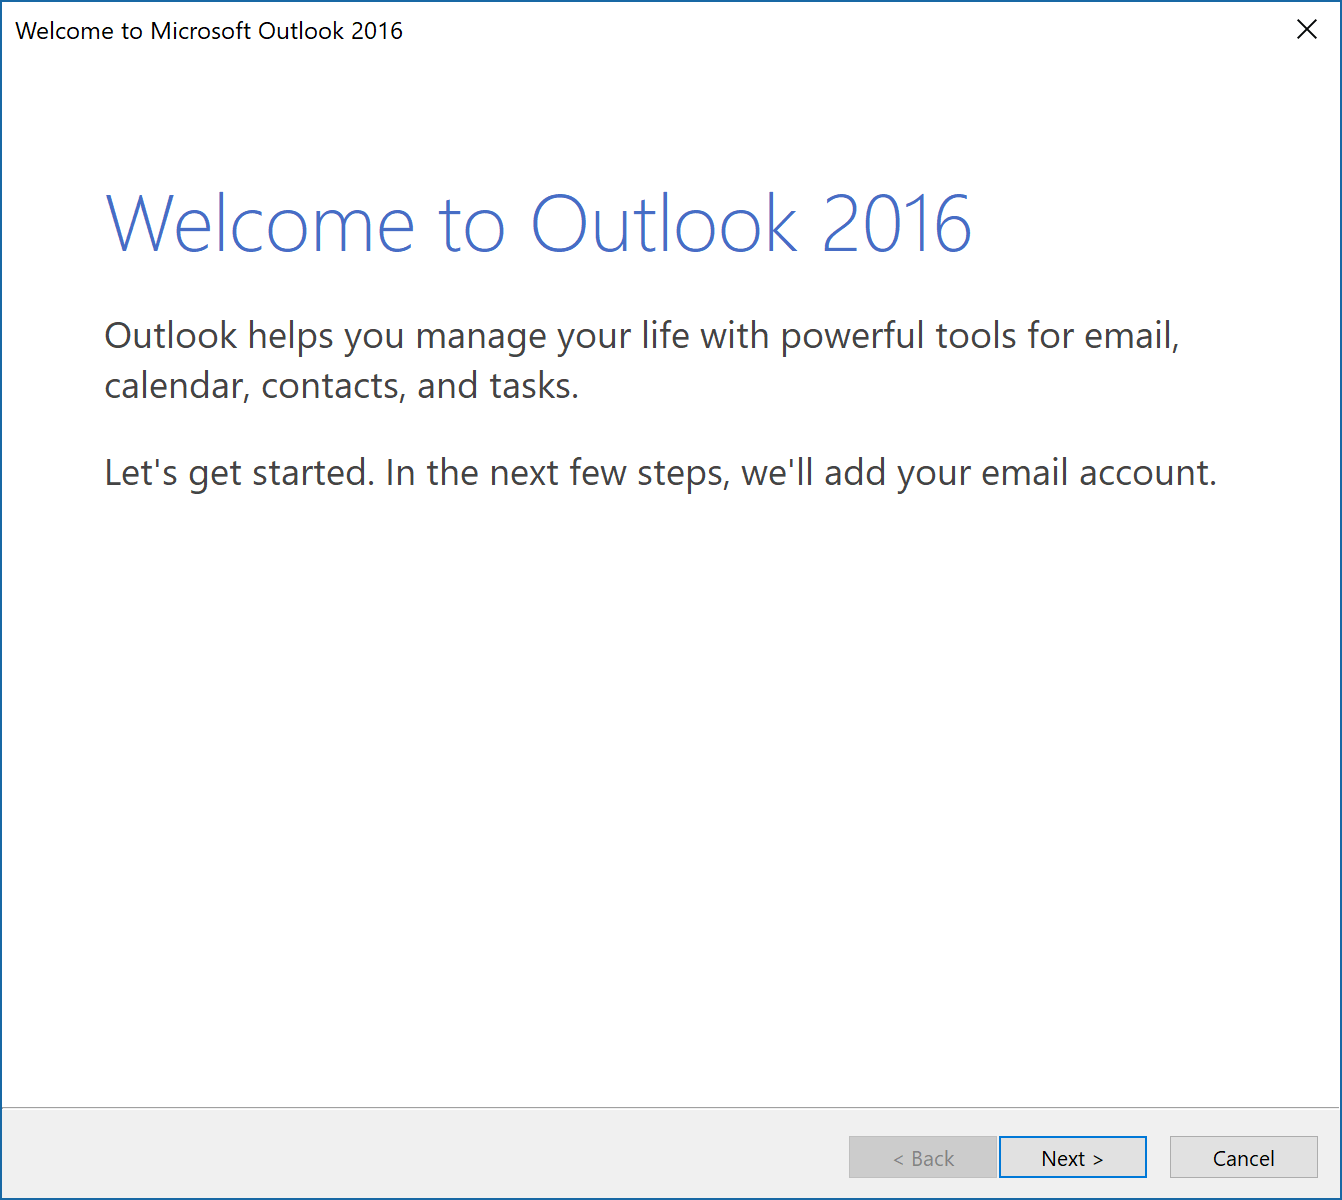 outlook 2016 for mac set up email account